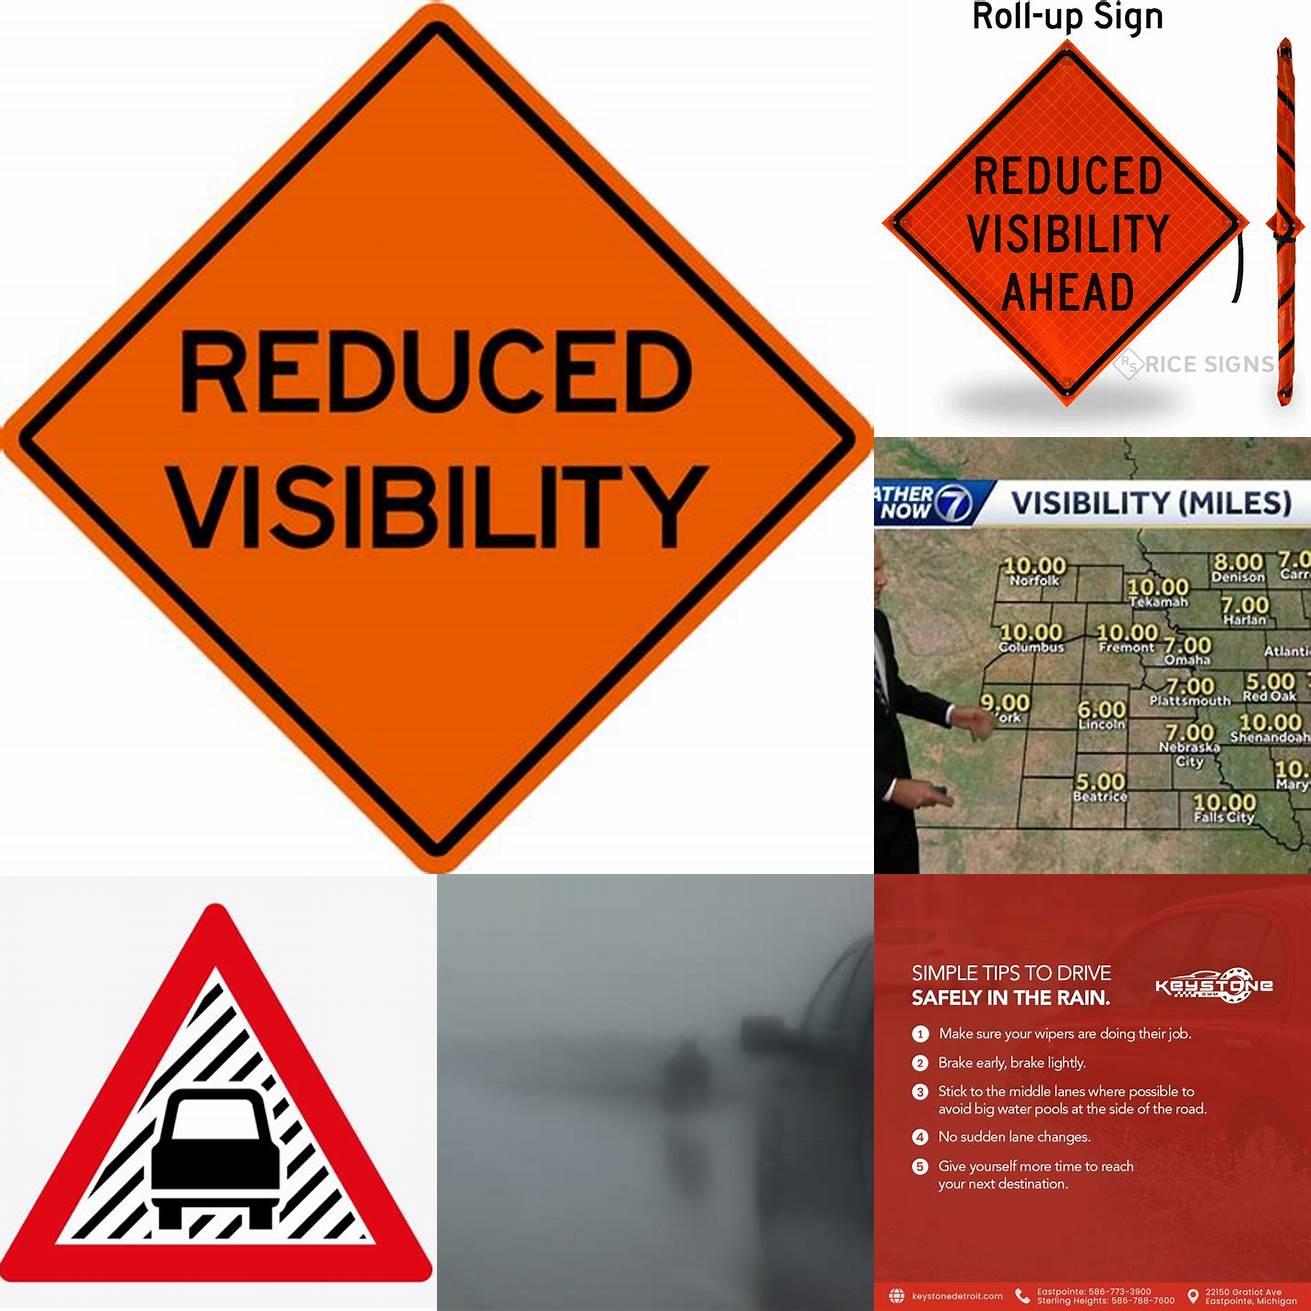 Reduced visibility